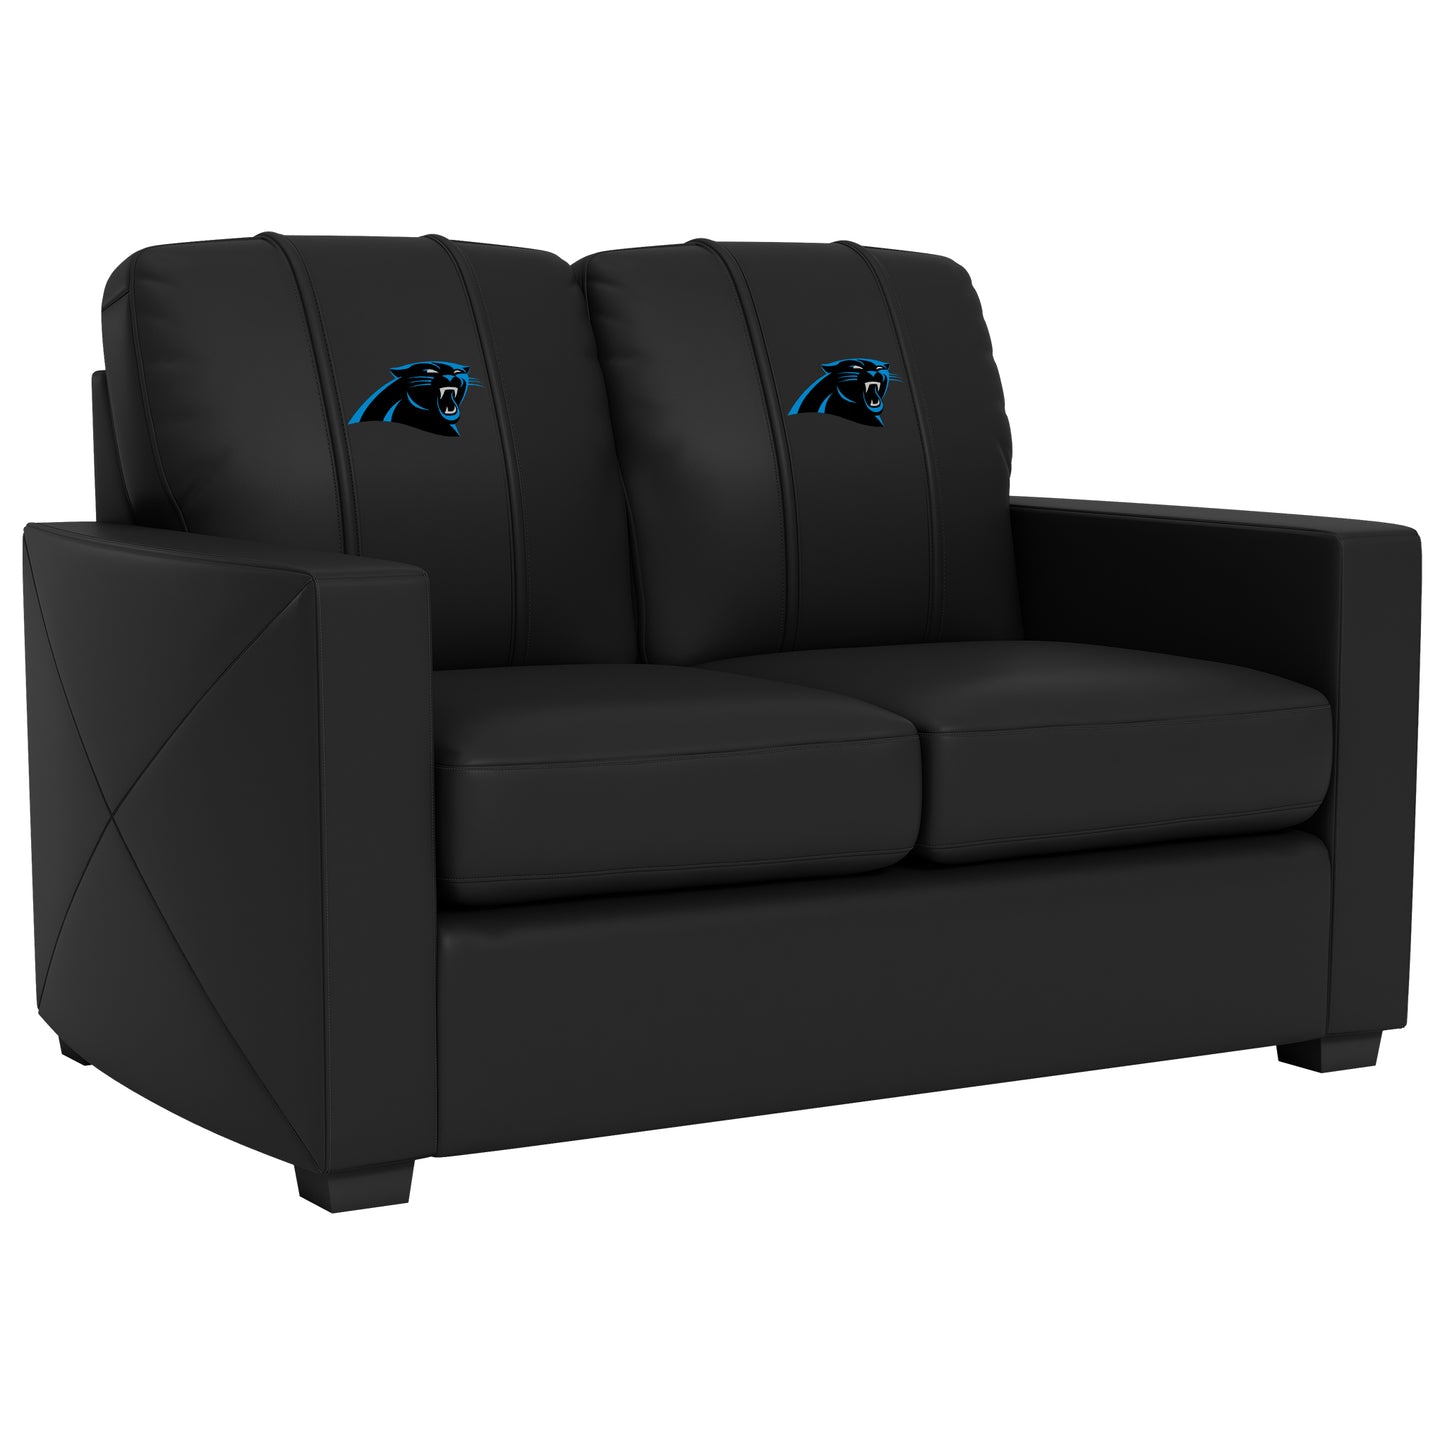 Silver Loveseat with  Carolina Panthers Primary Logo